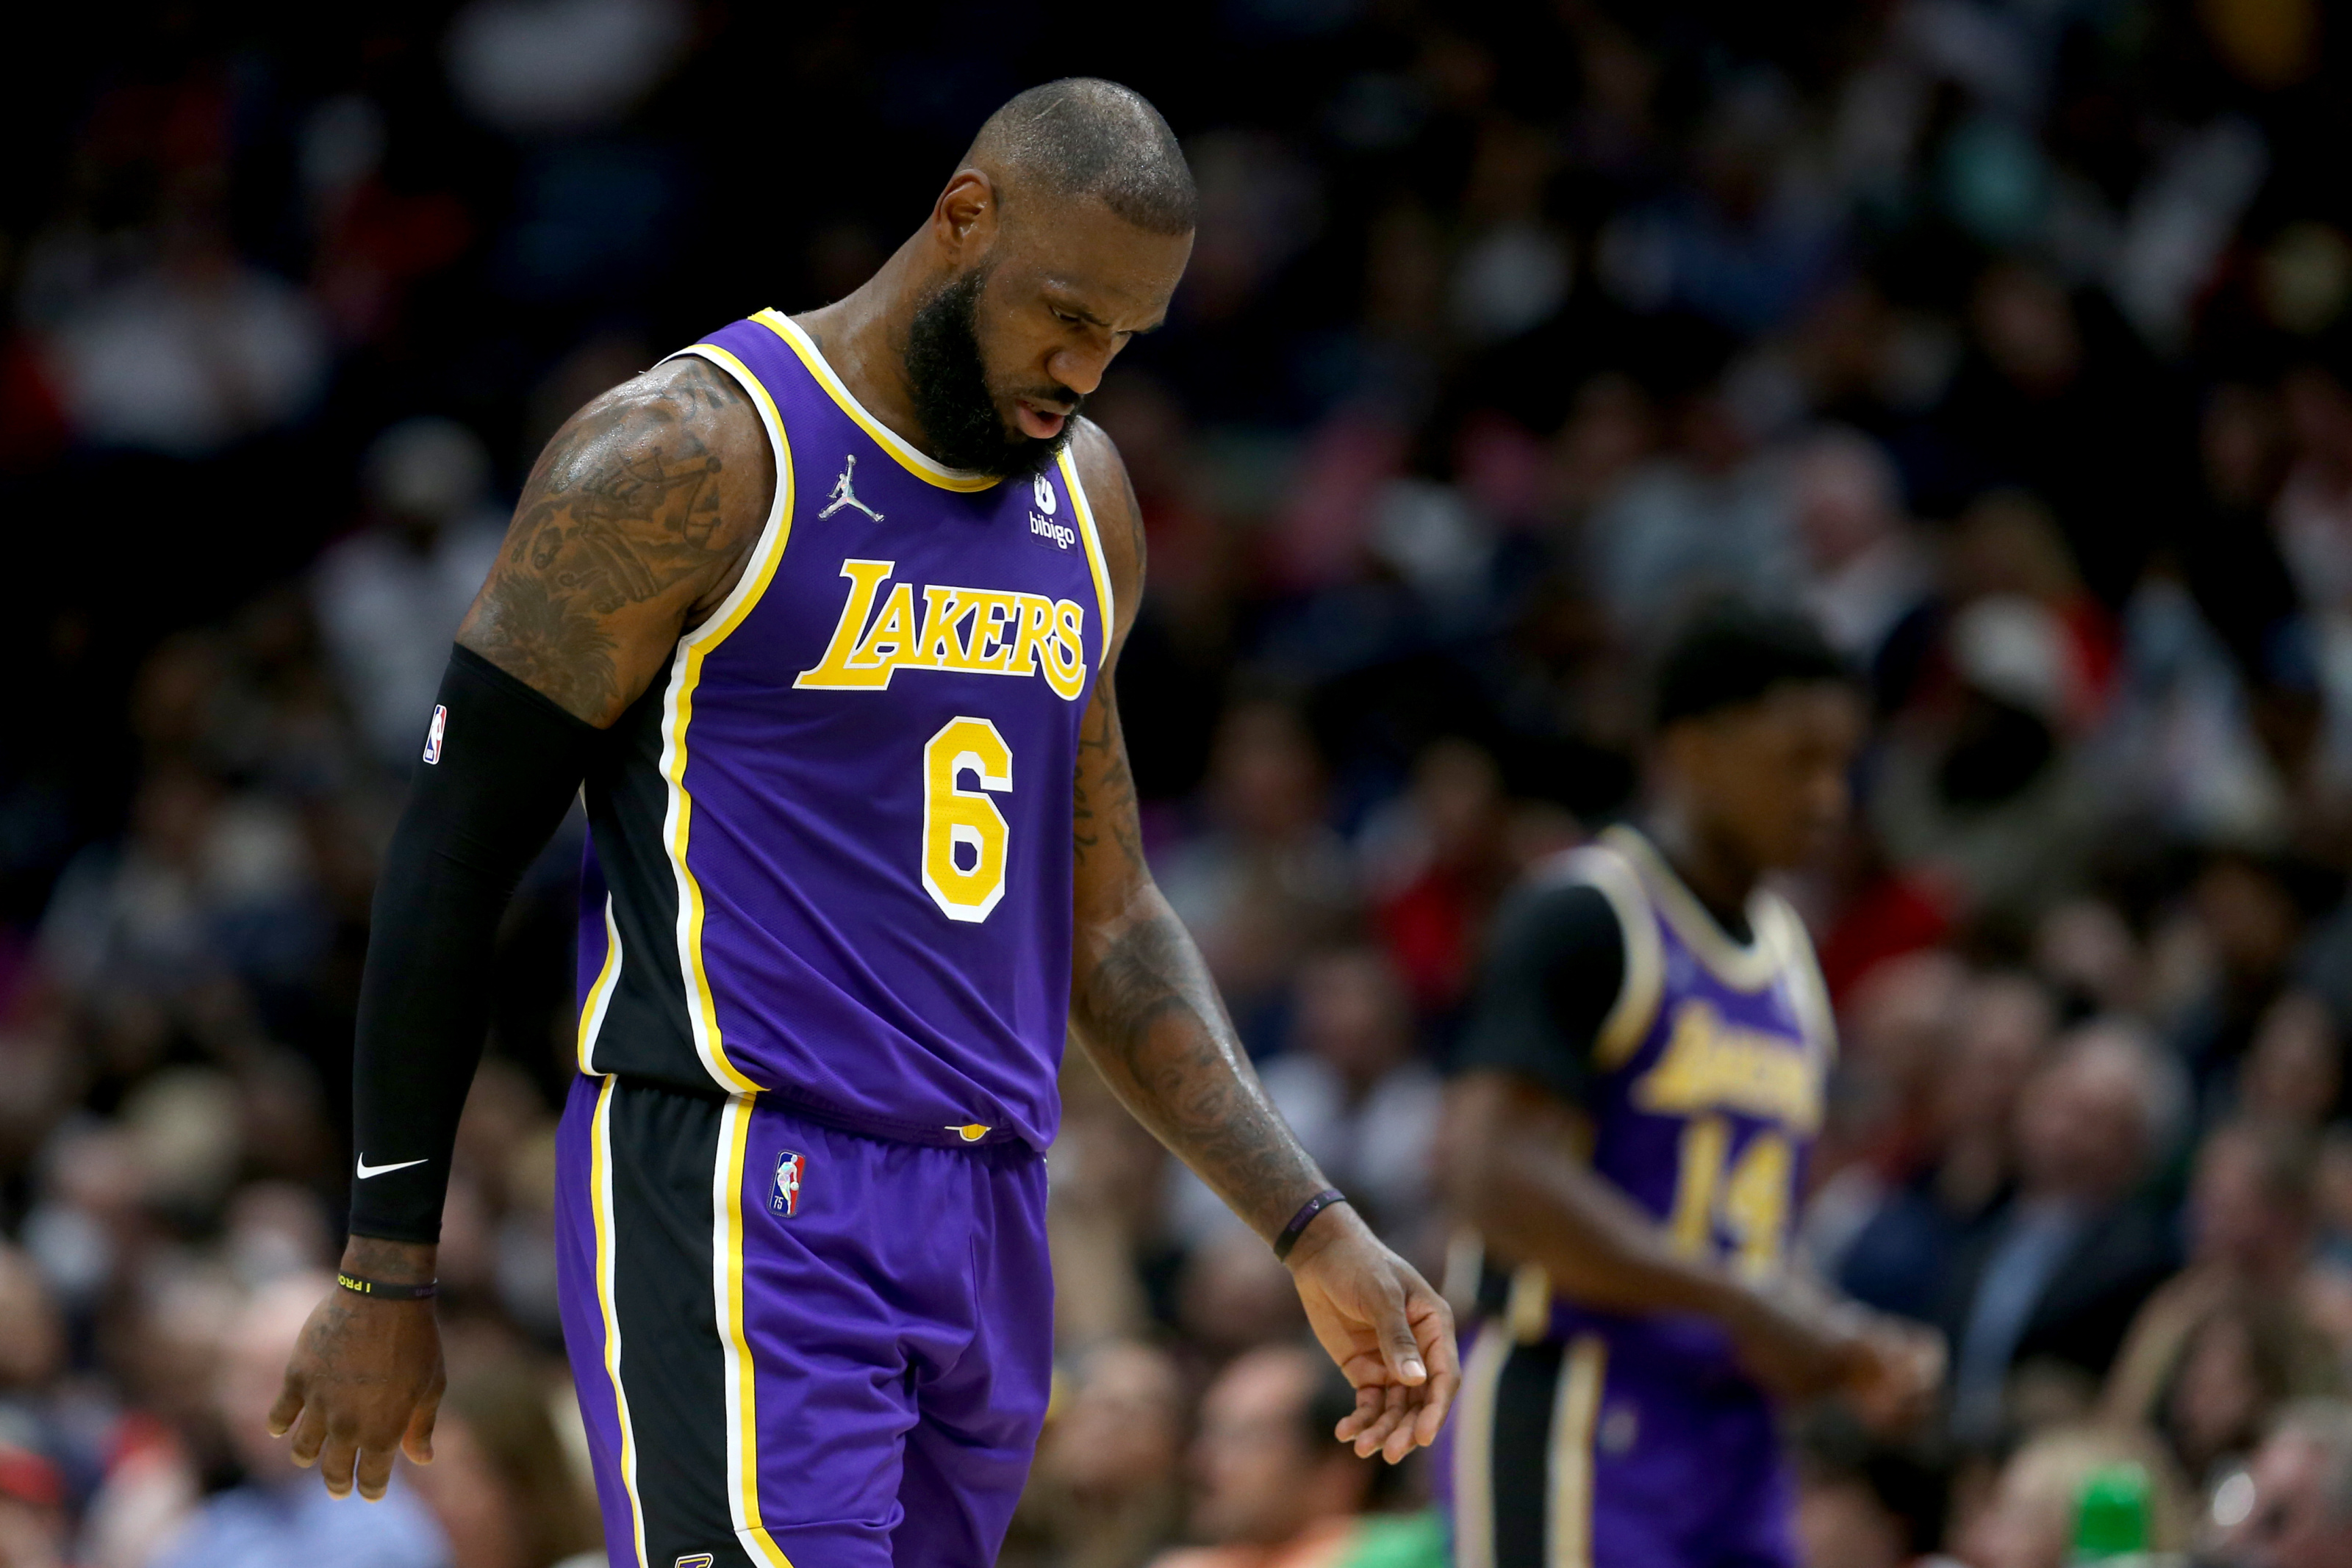 Lakers' LeBron James to change uniform from 6 to 23 next season, per agent  